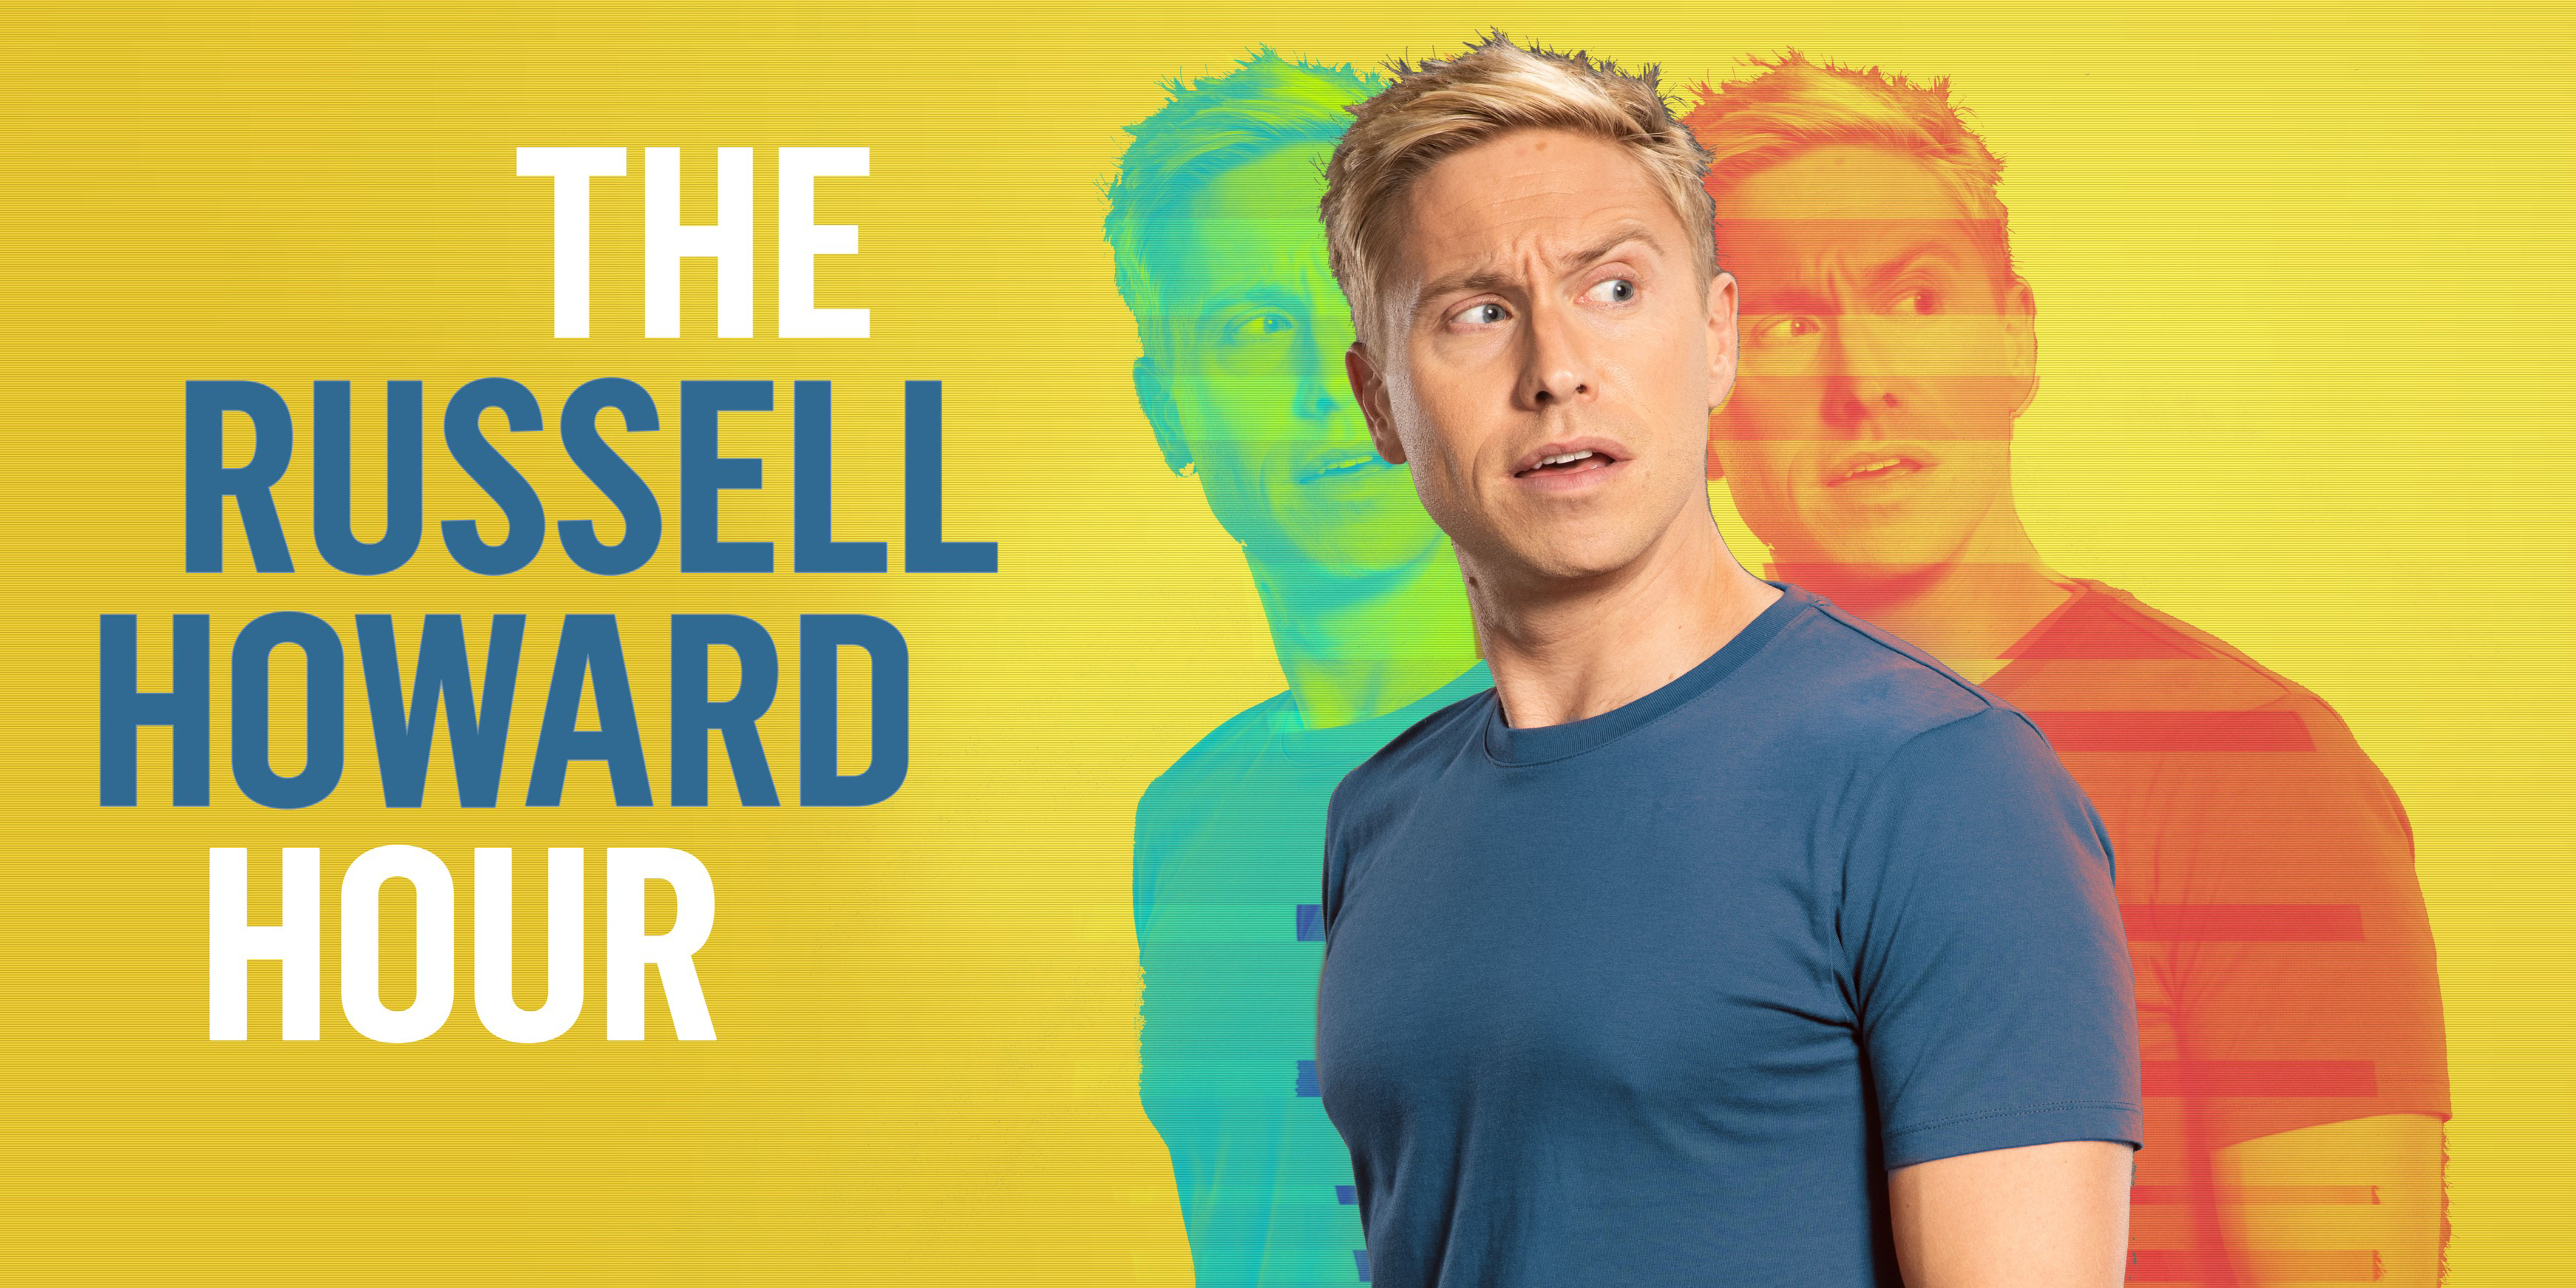 THE RUSSELL HOWARD HOUR RETURNS TO SKY ONE FOR SERIES 3 AT 10PM ON 7TH